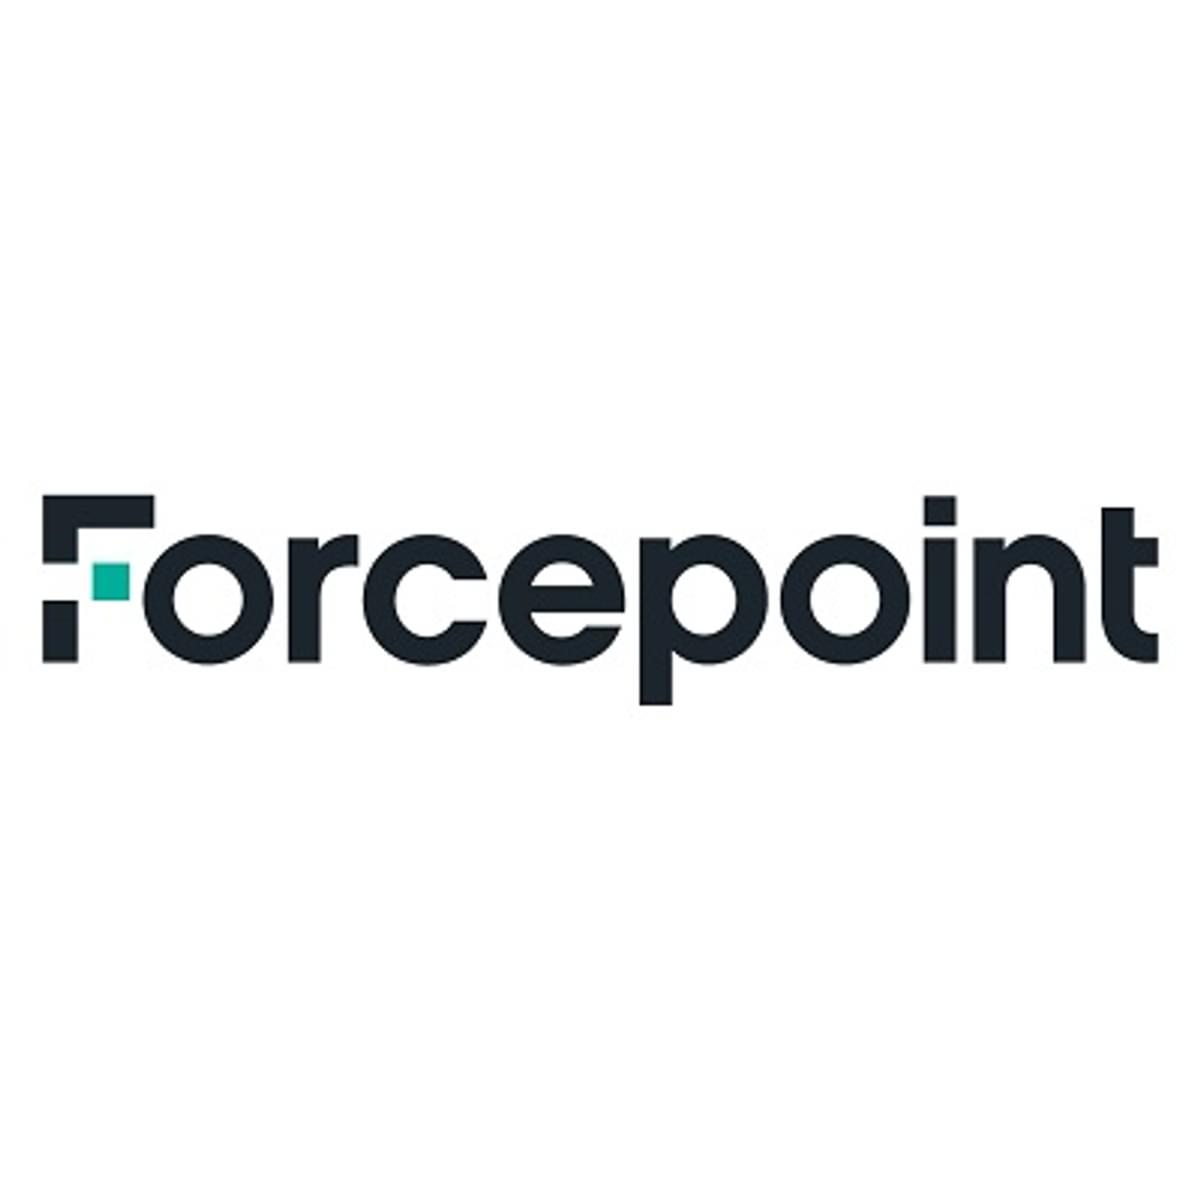 Forcepoint neemt Deep Secure over image